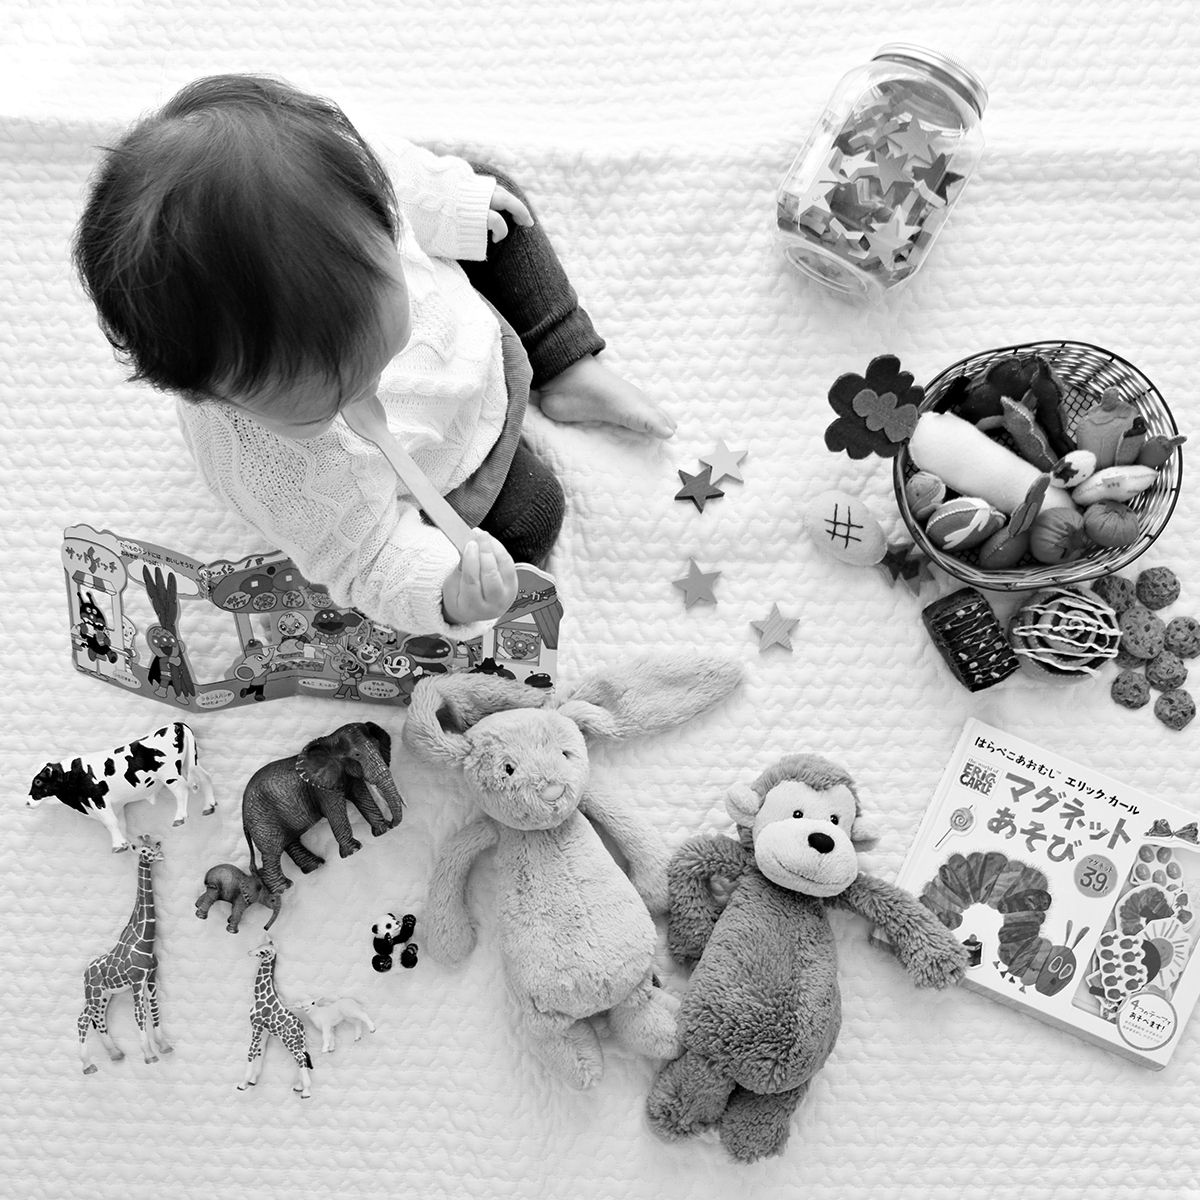 Fewer Toys for Deeper Play